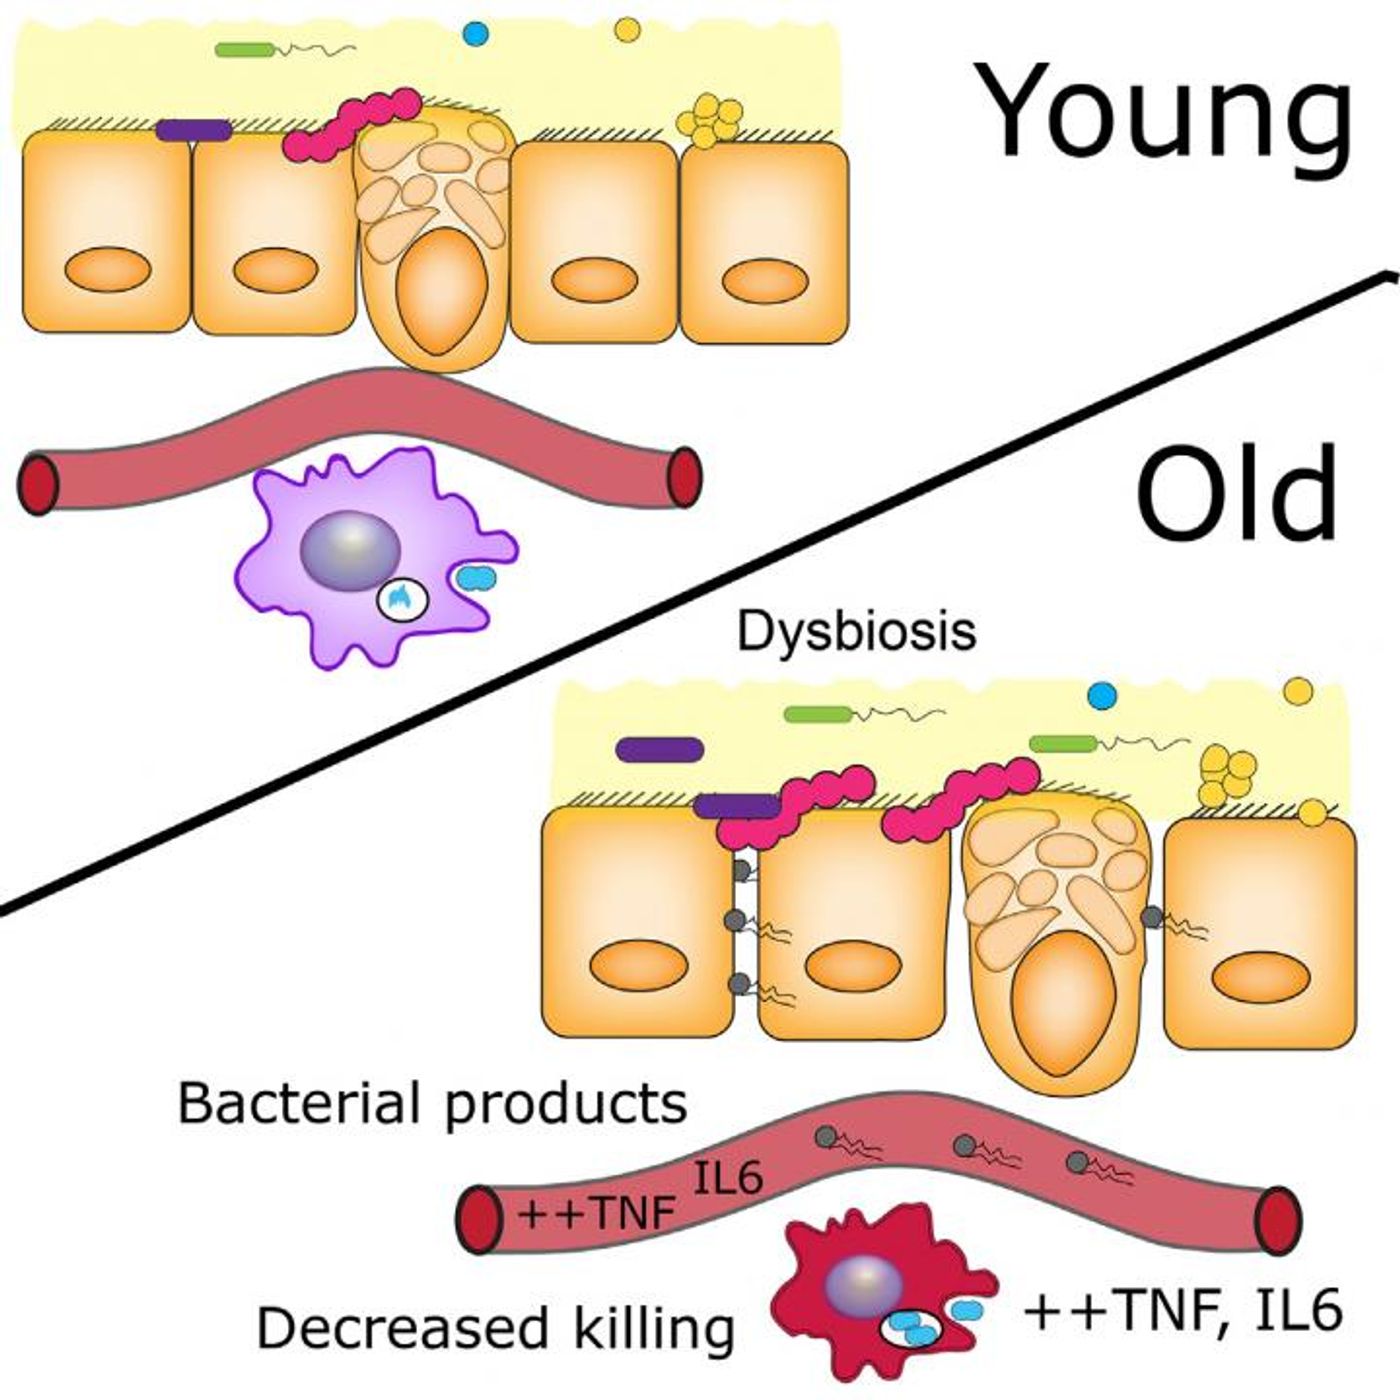 This visual abstract represents the findings of Thevaranjan et al. who, using young and old germ-free and conventional mice, demonstrate that age-related microbiota changes drive intestinal permeability, age-associated inflammation, and decreased macrophage function. Reducing TNF levels rescues microbiota changes and protects old mice from intestinal permeability. / Credit: Thevaranjan et al./Cell Host & Microbe 2017